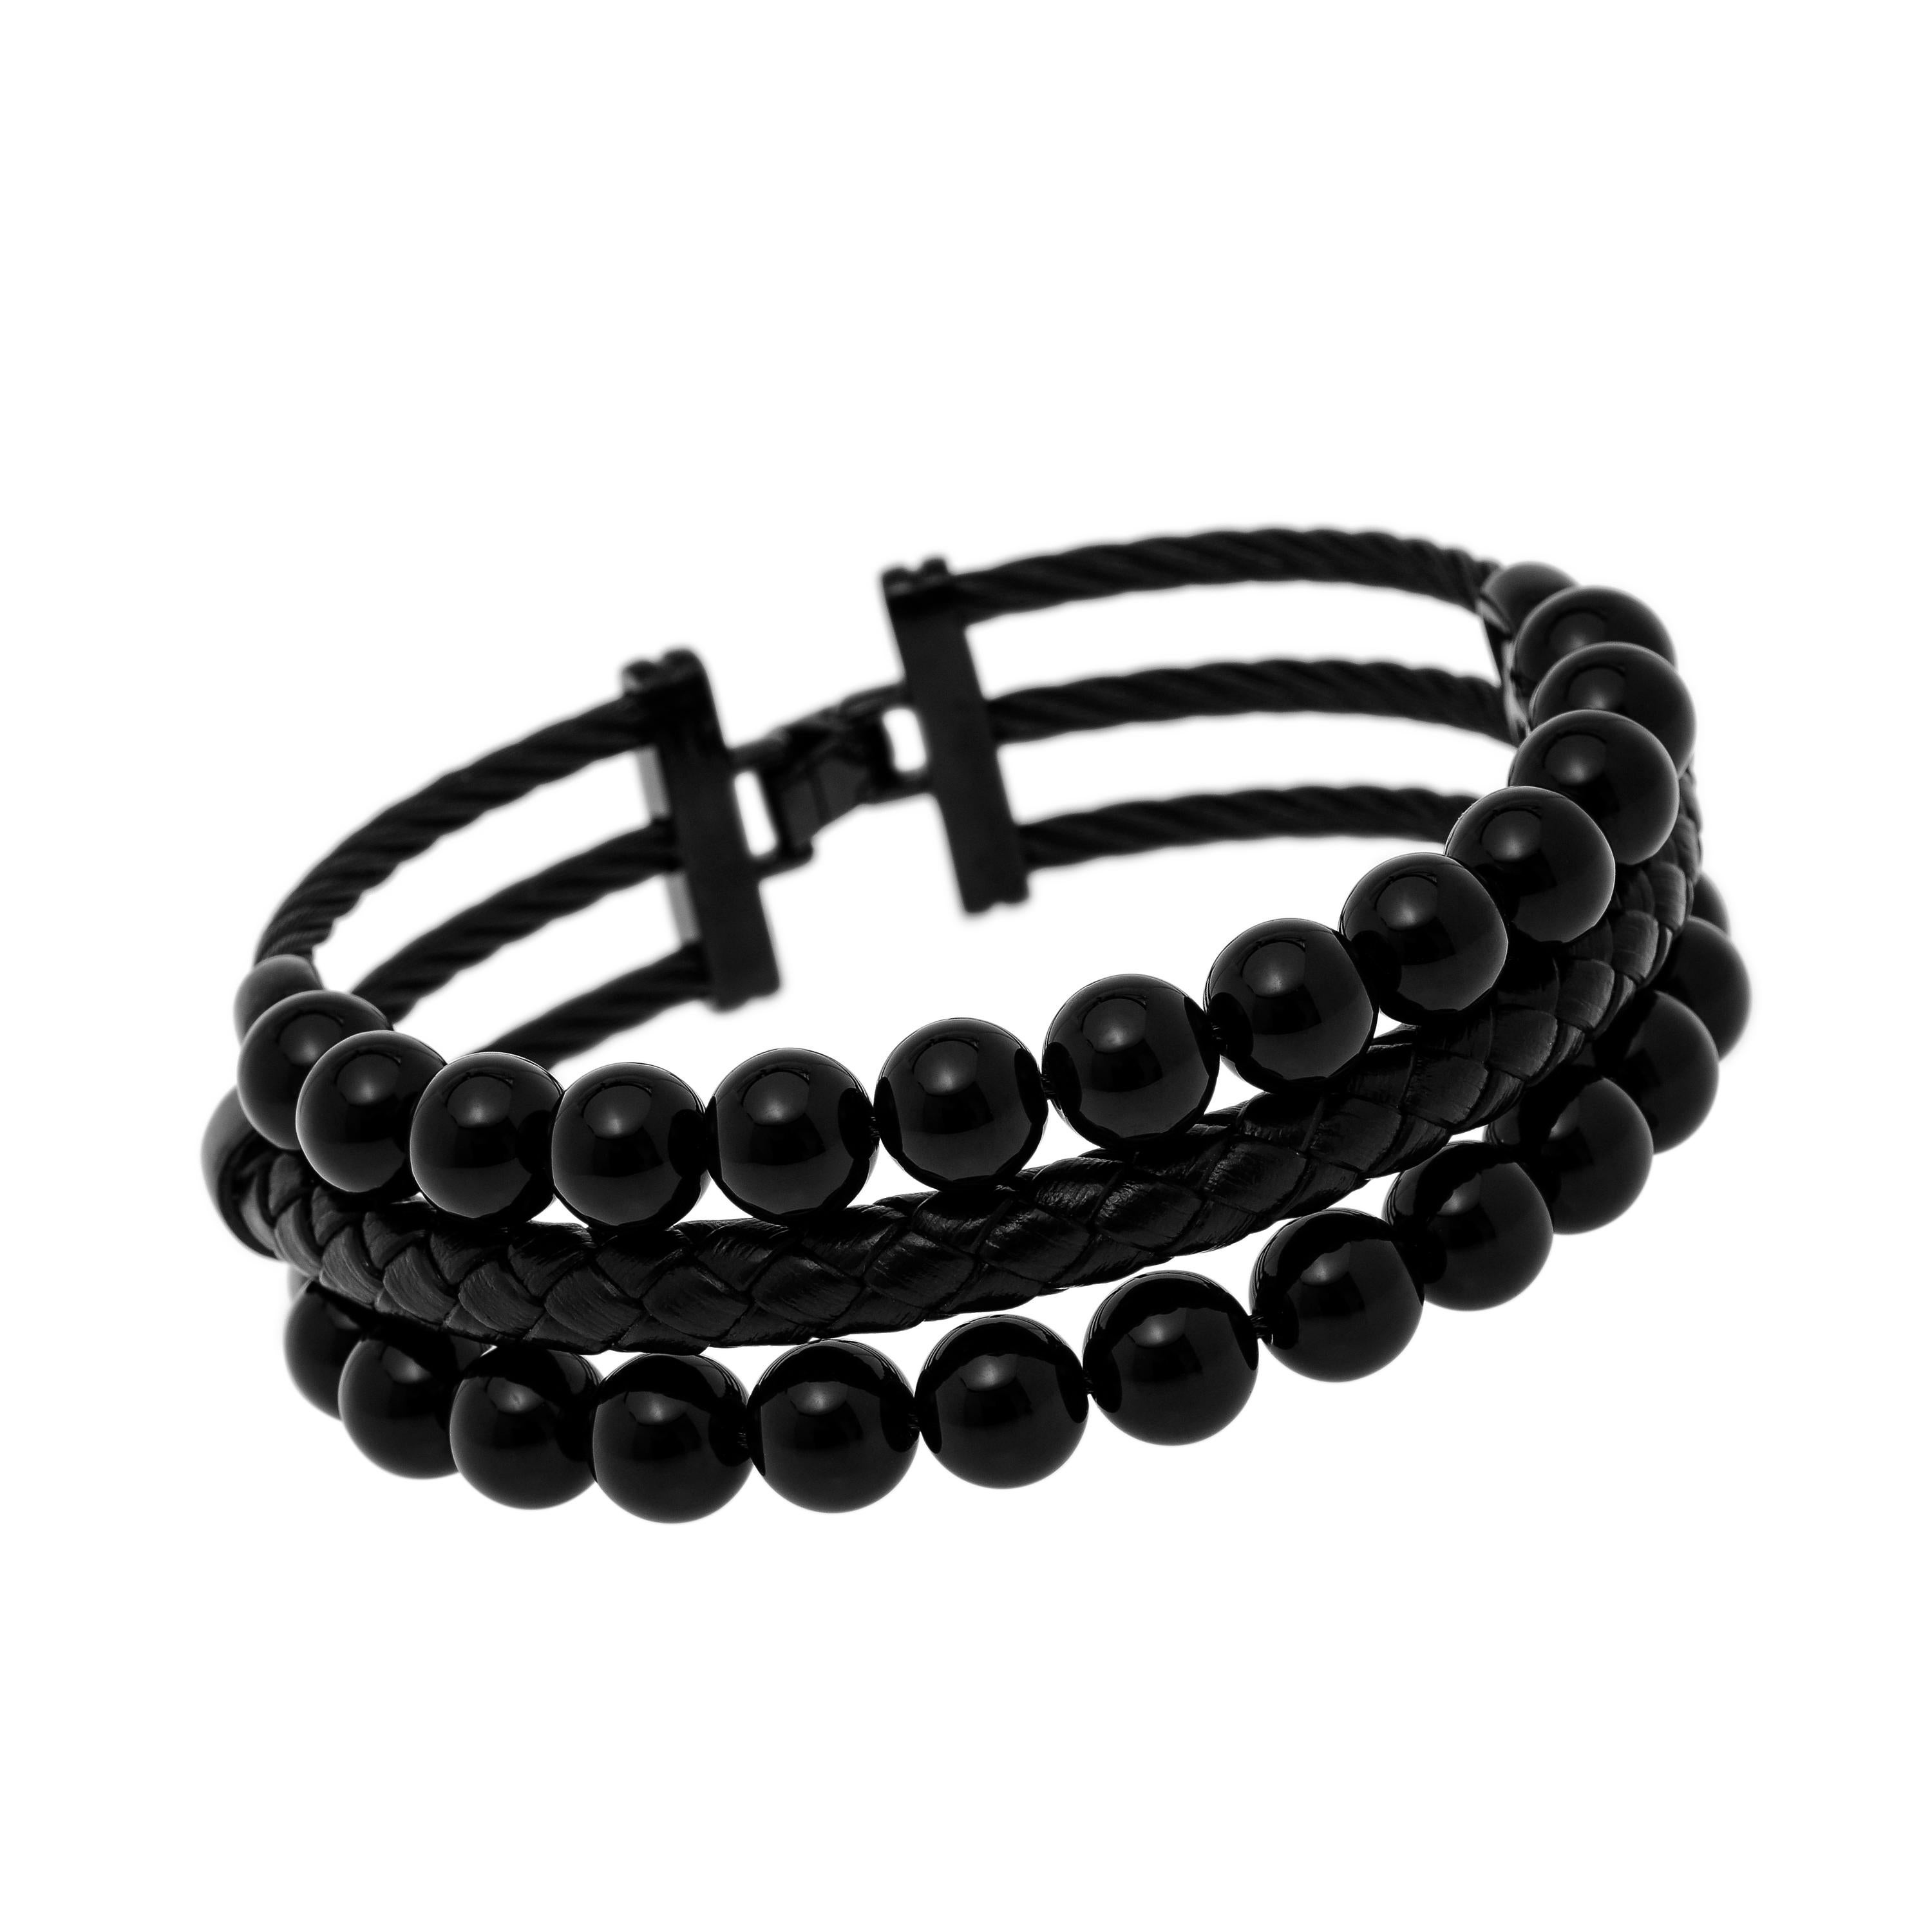 Contemporary Alor Stainless Steel, Leather, And Onyx Bead Bracelet